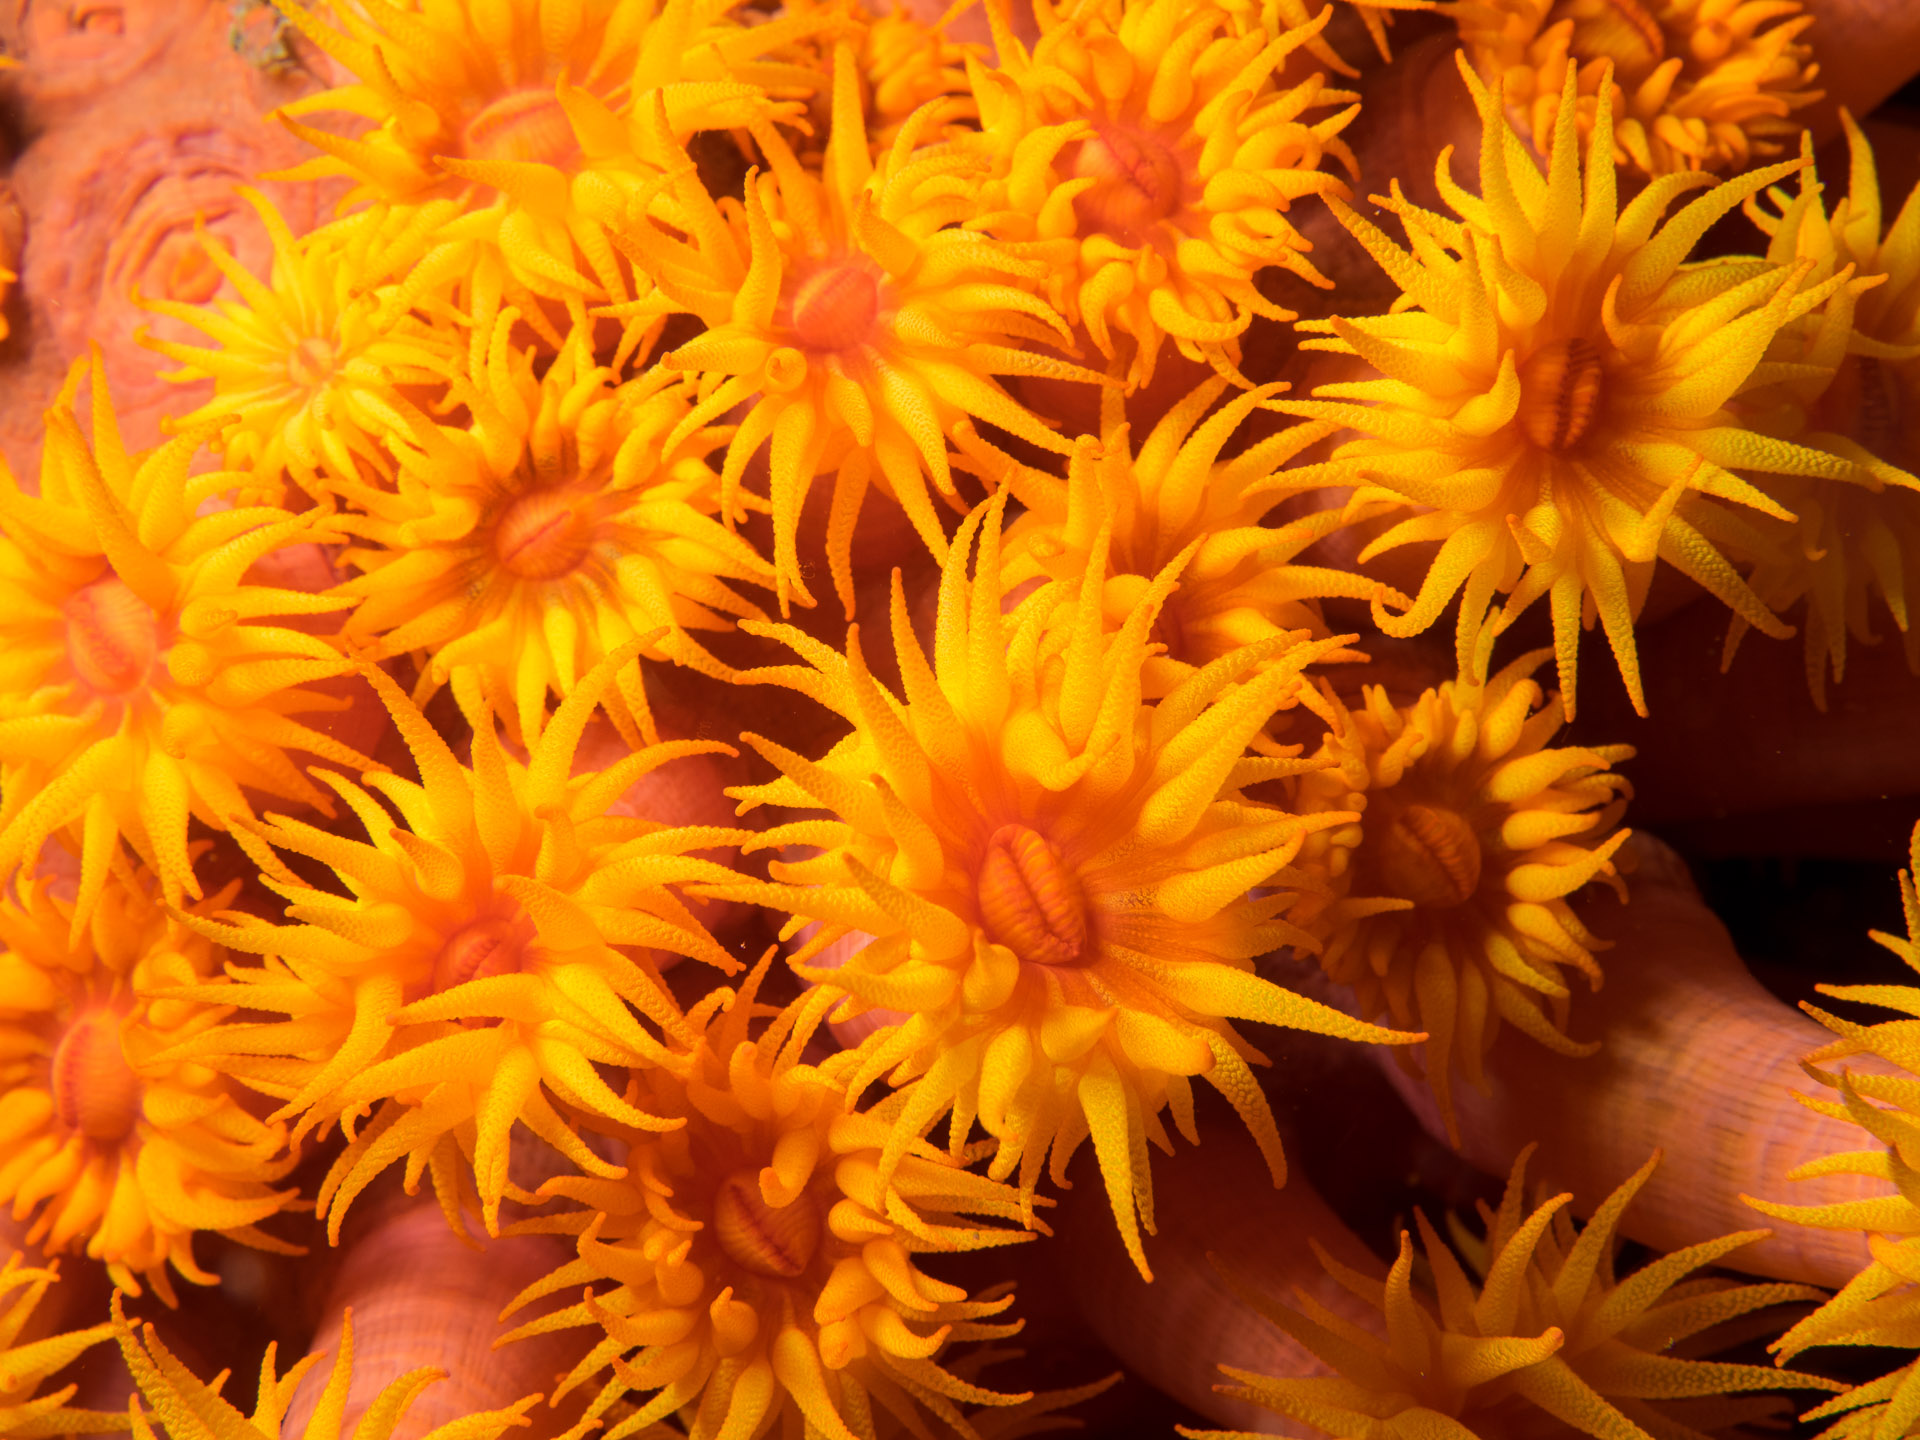 Sunflower coral